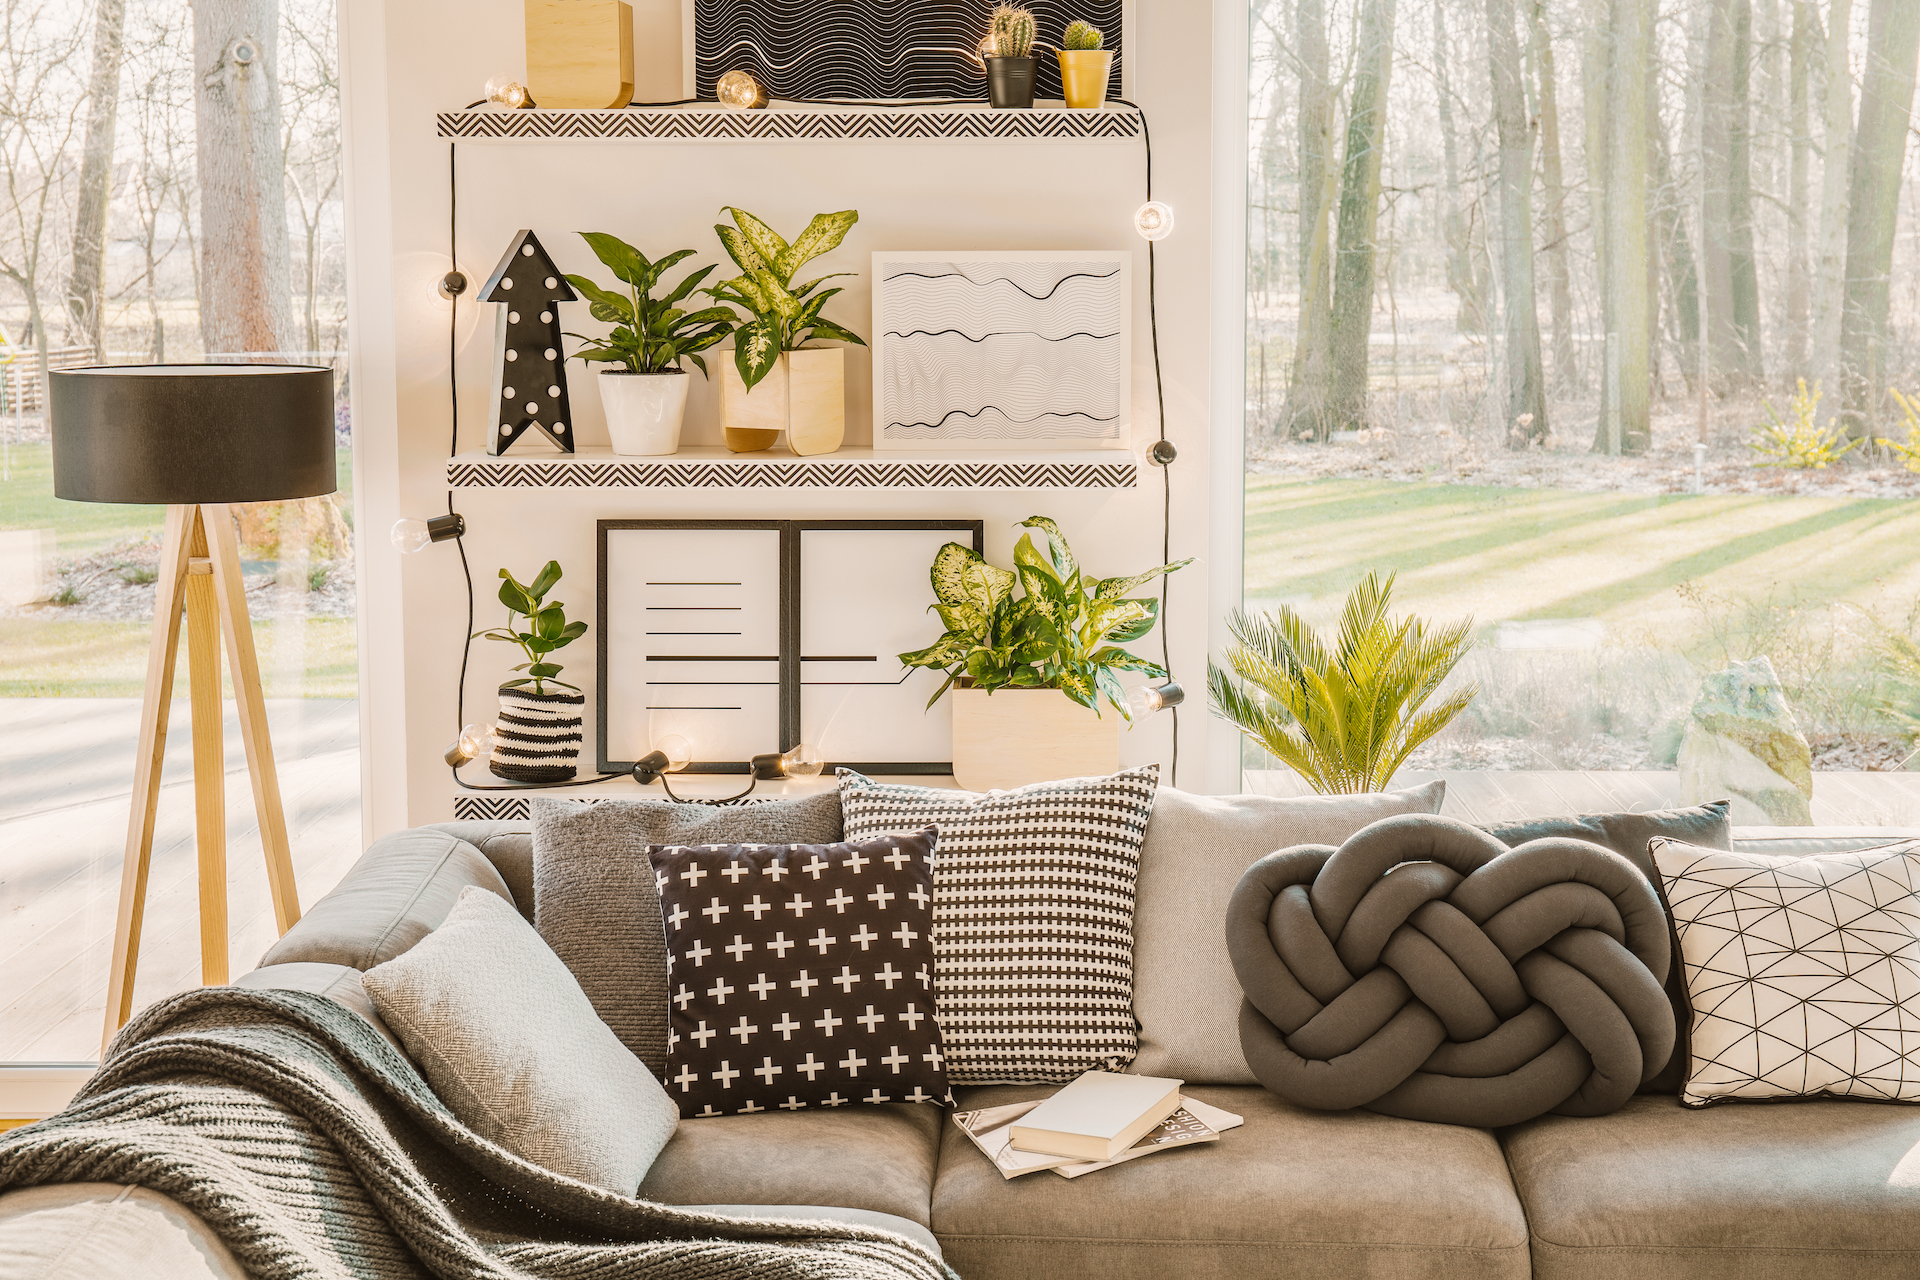 Patterned pillows on grey couch in living room interior with plants on shelves near window